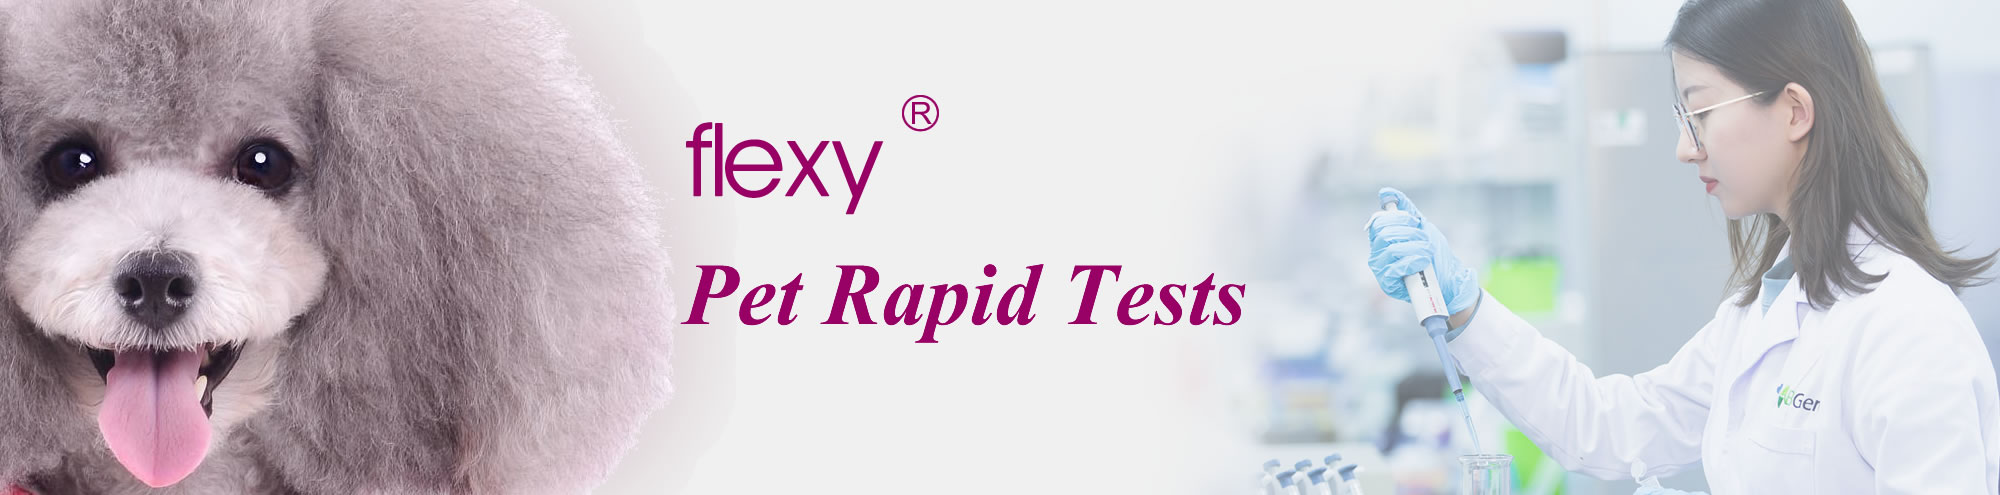 Flexy Pet Rapid Test Kits for cat and dog disease testing